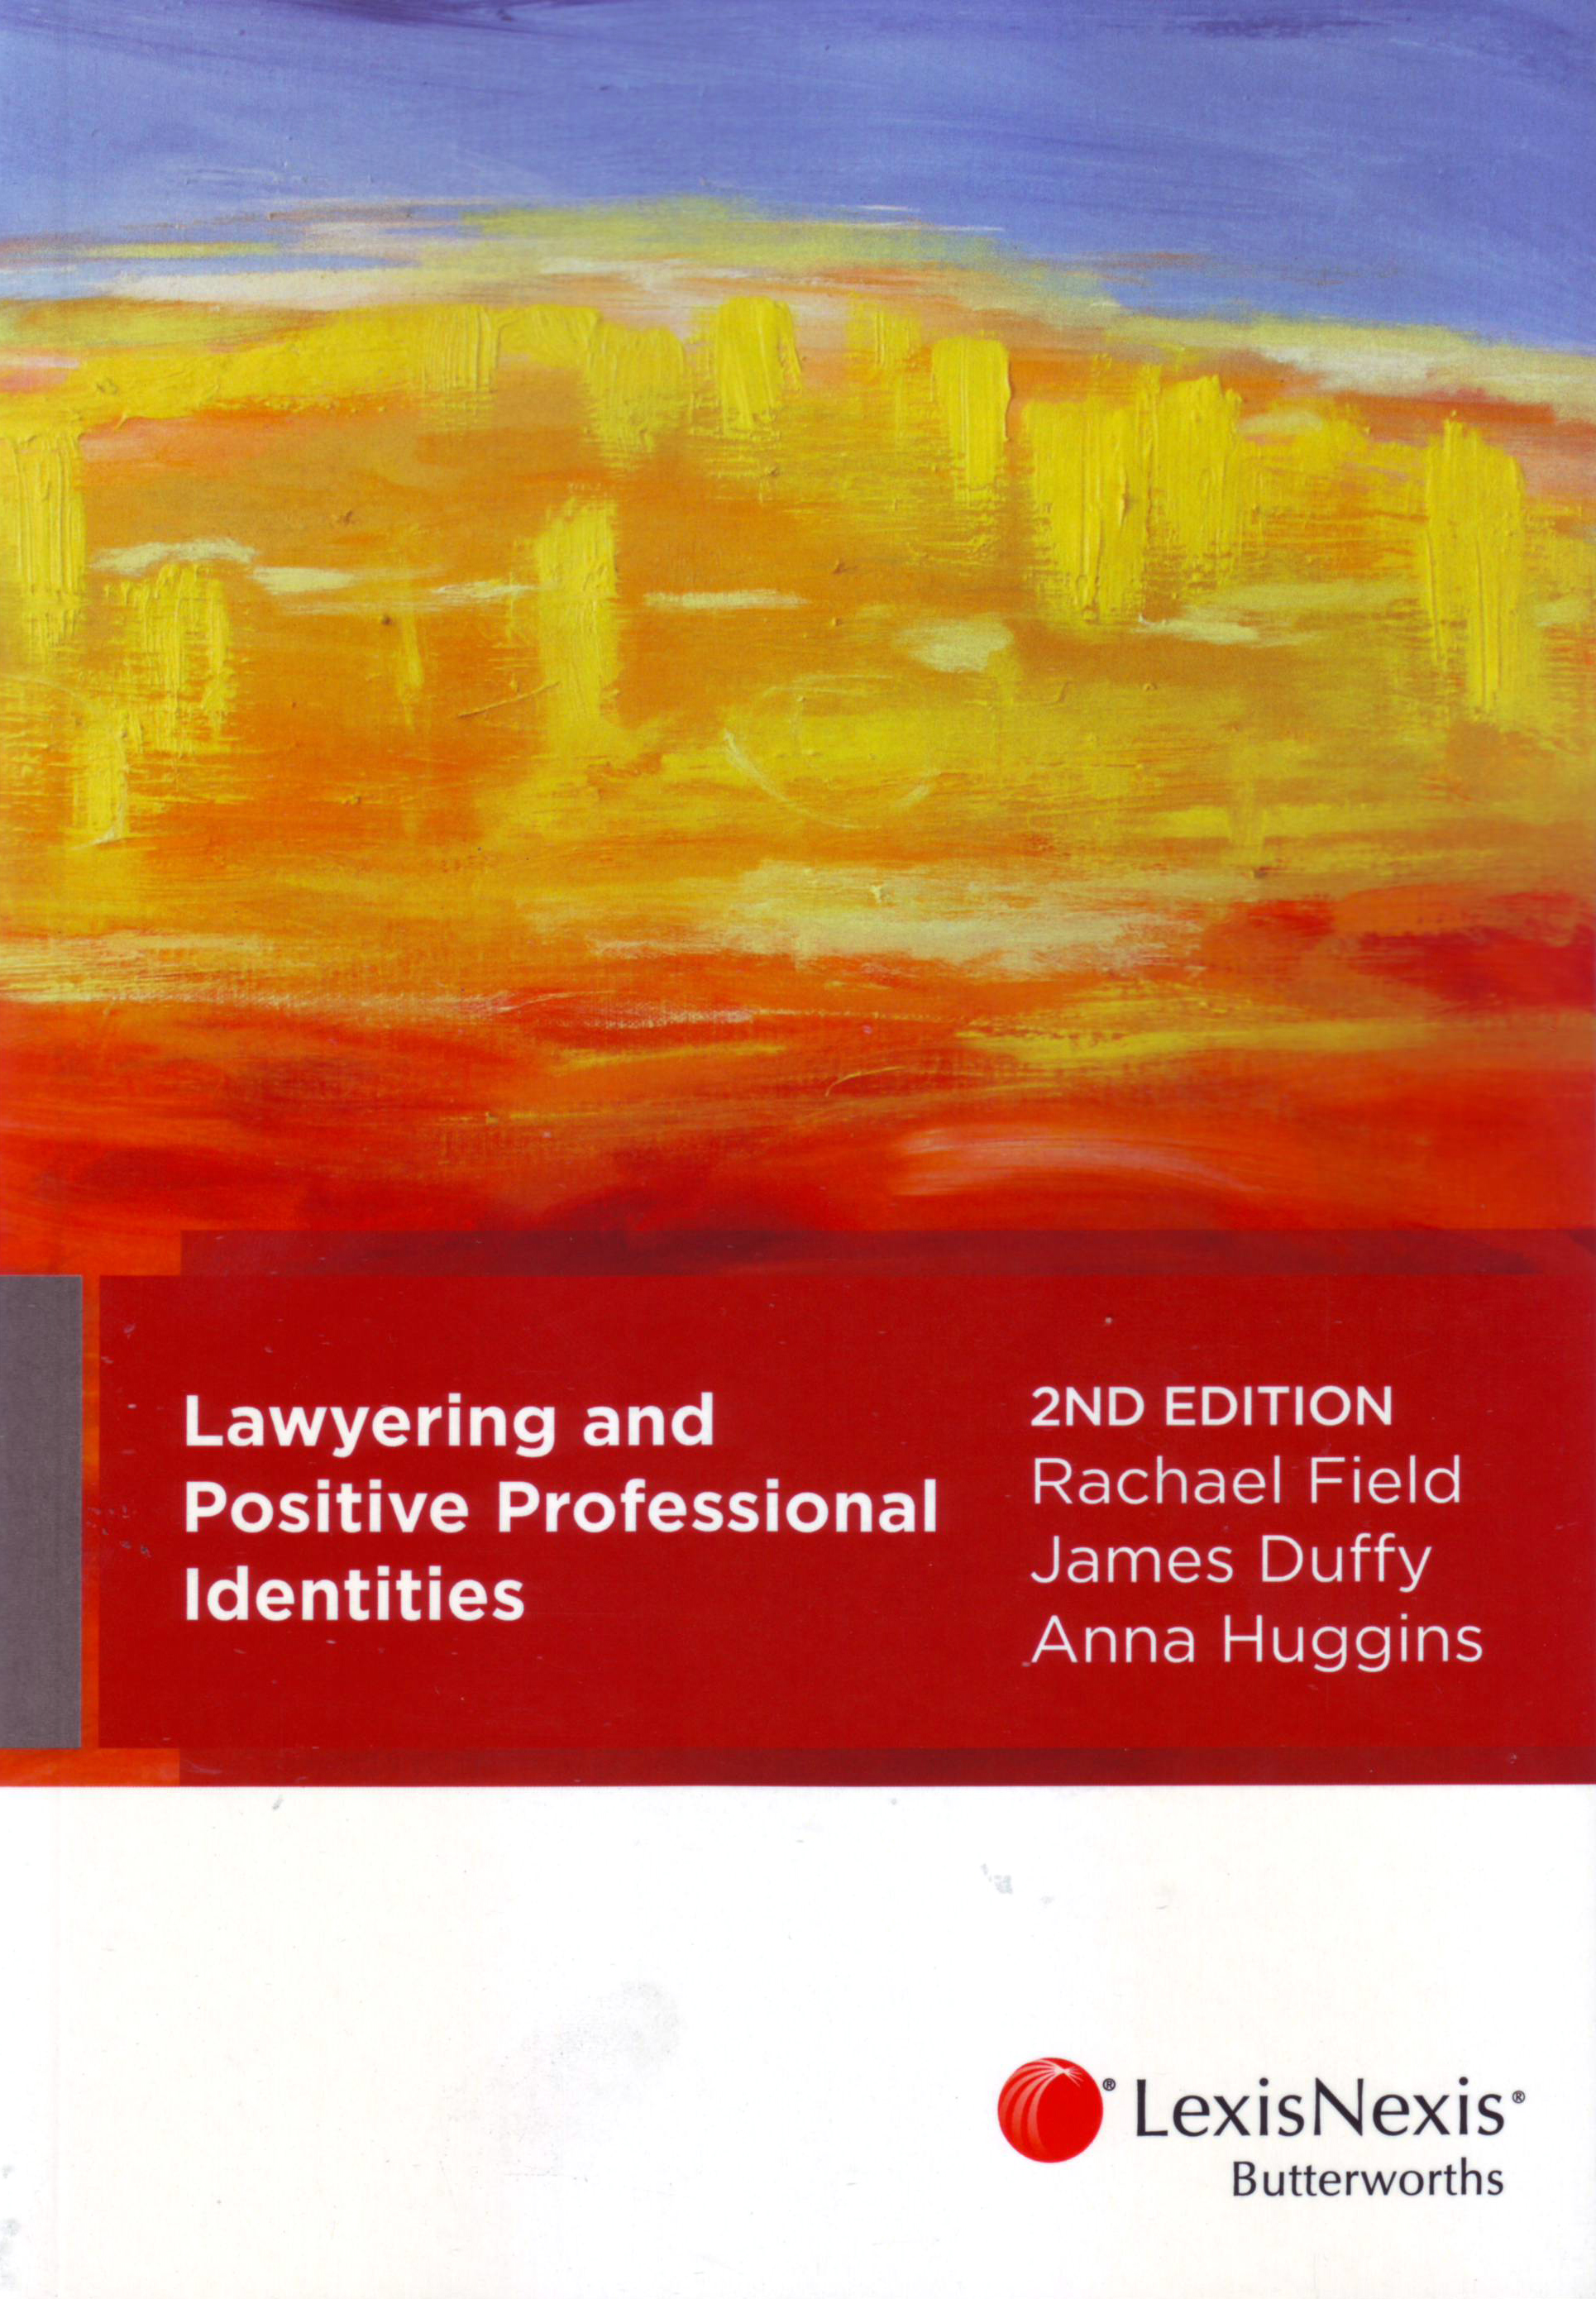 Lawyering and Positive Professional Identities e2